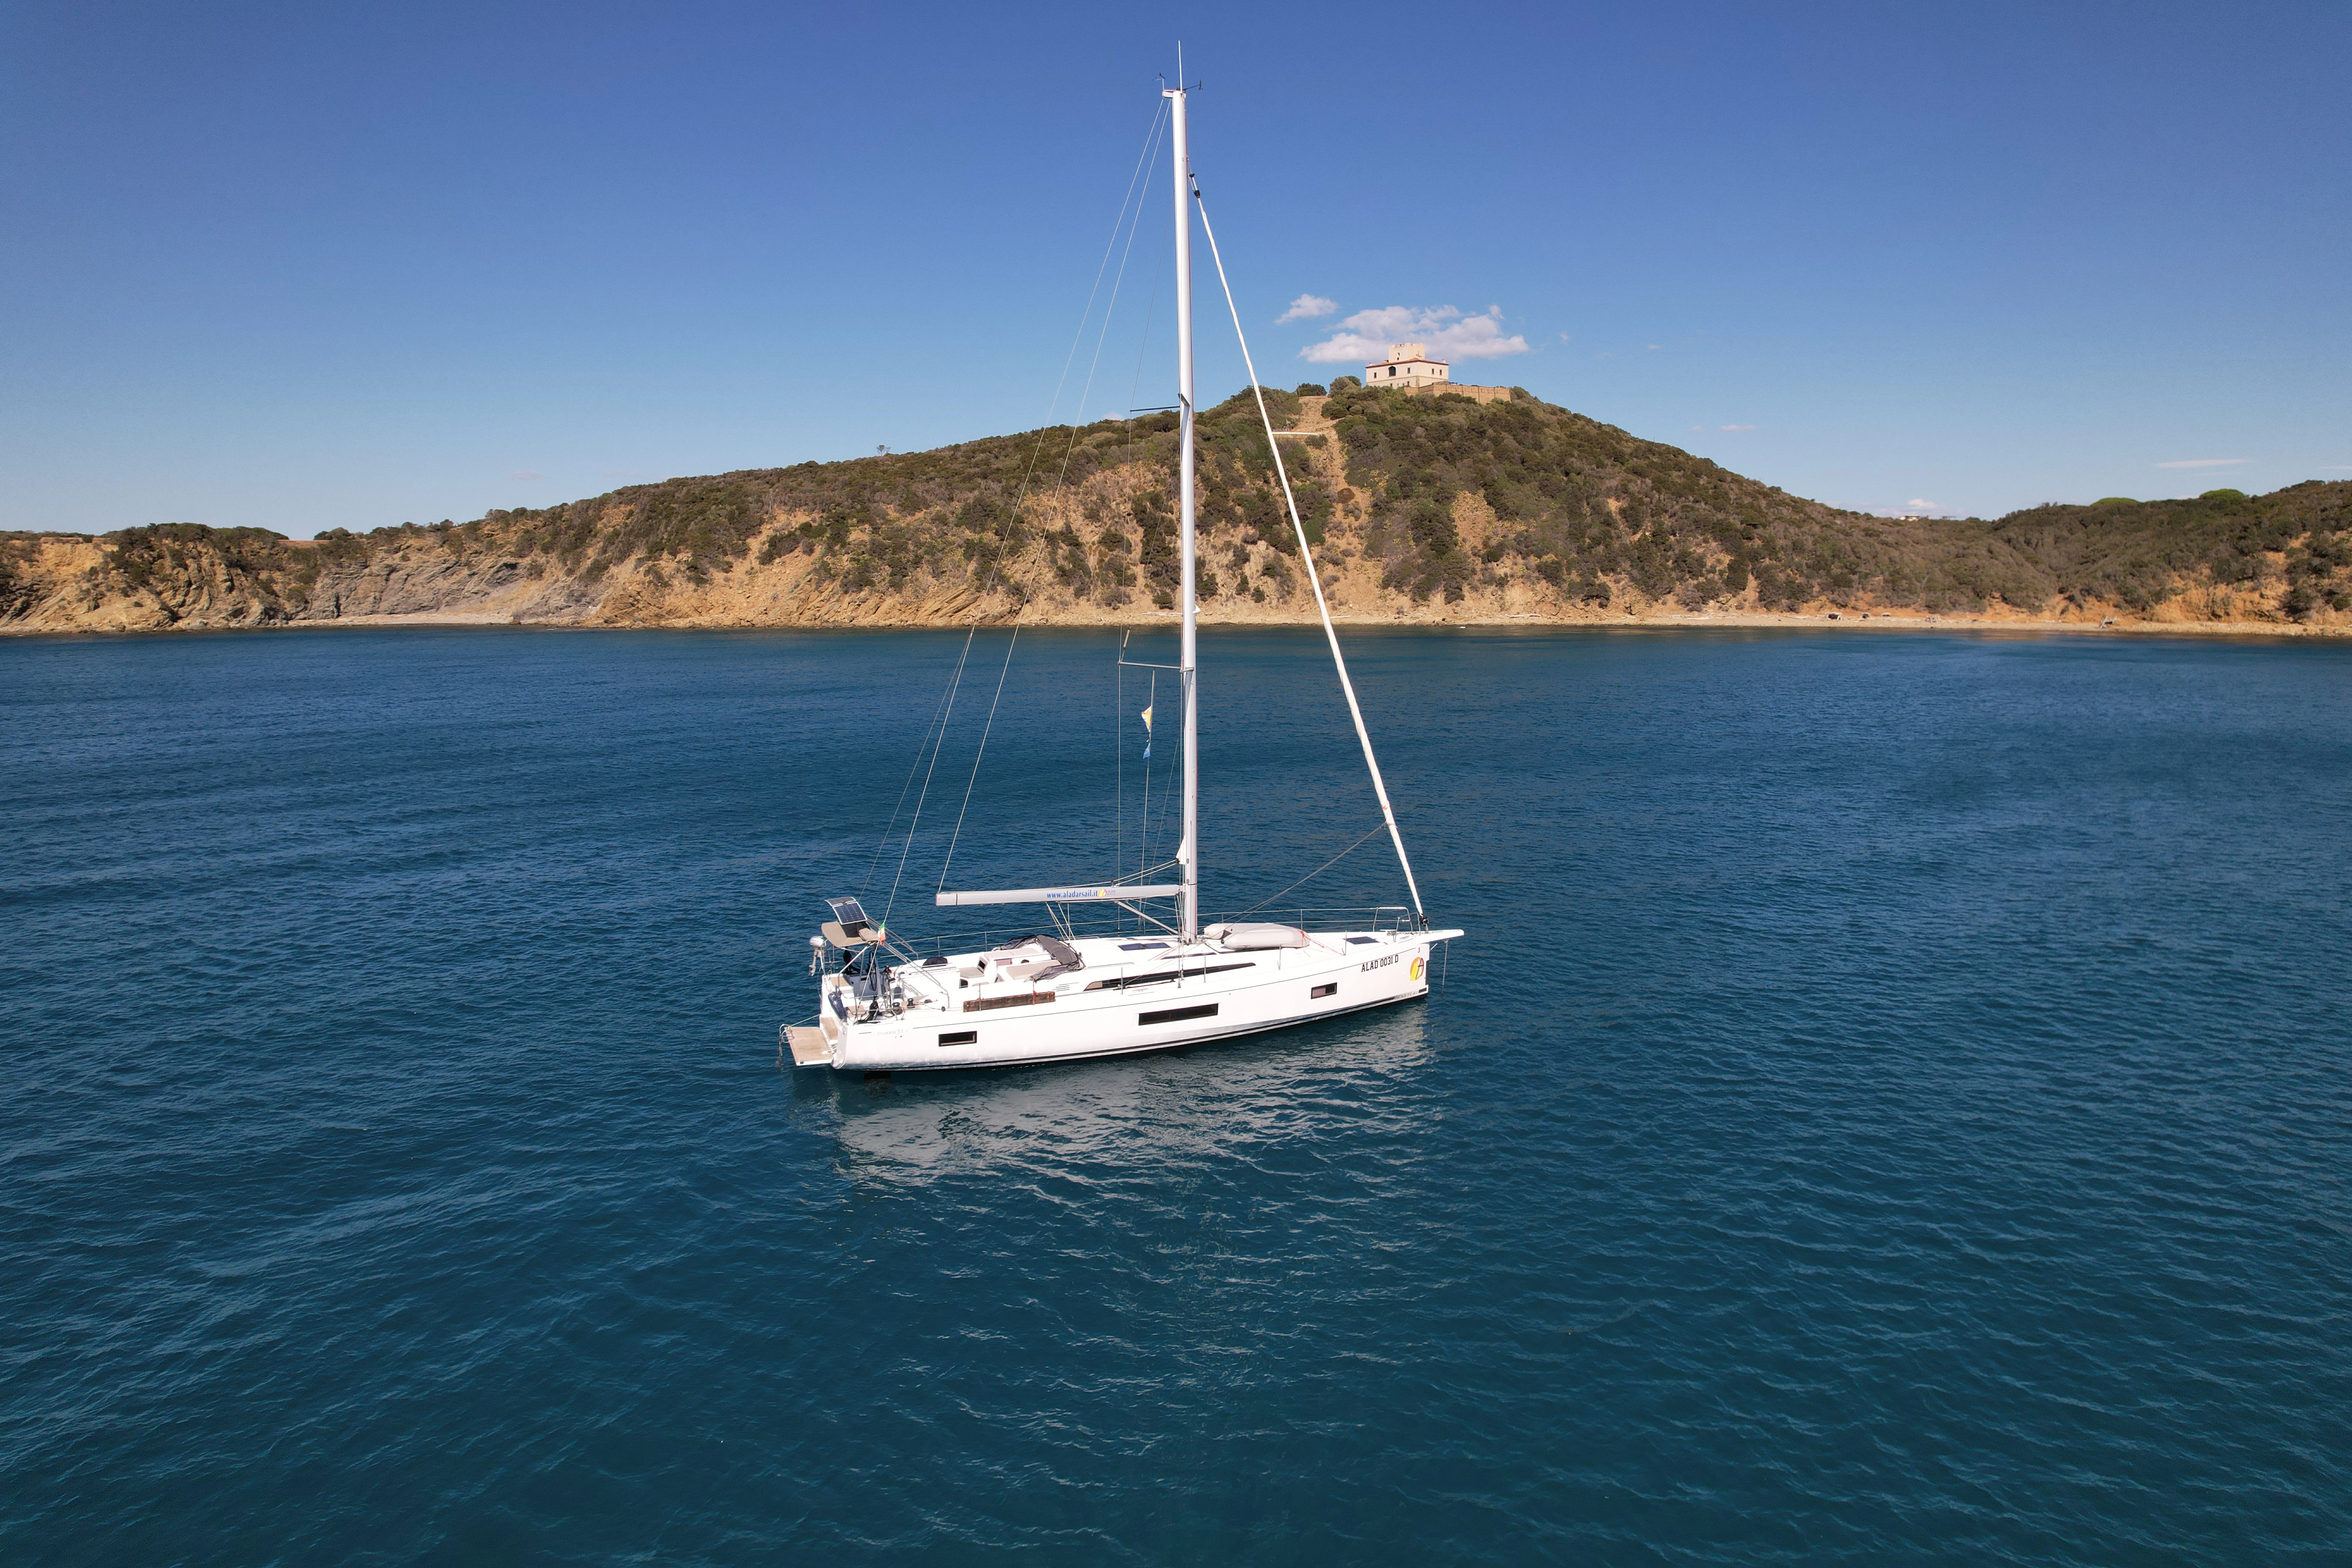  Beneteau Oceanis 51.1 from the top